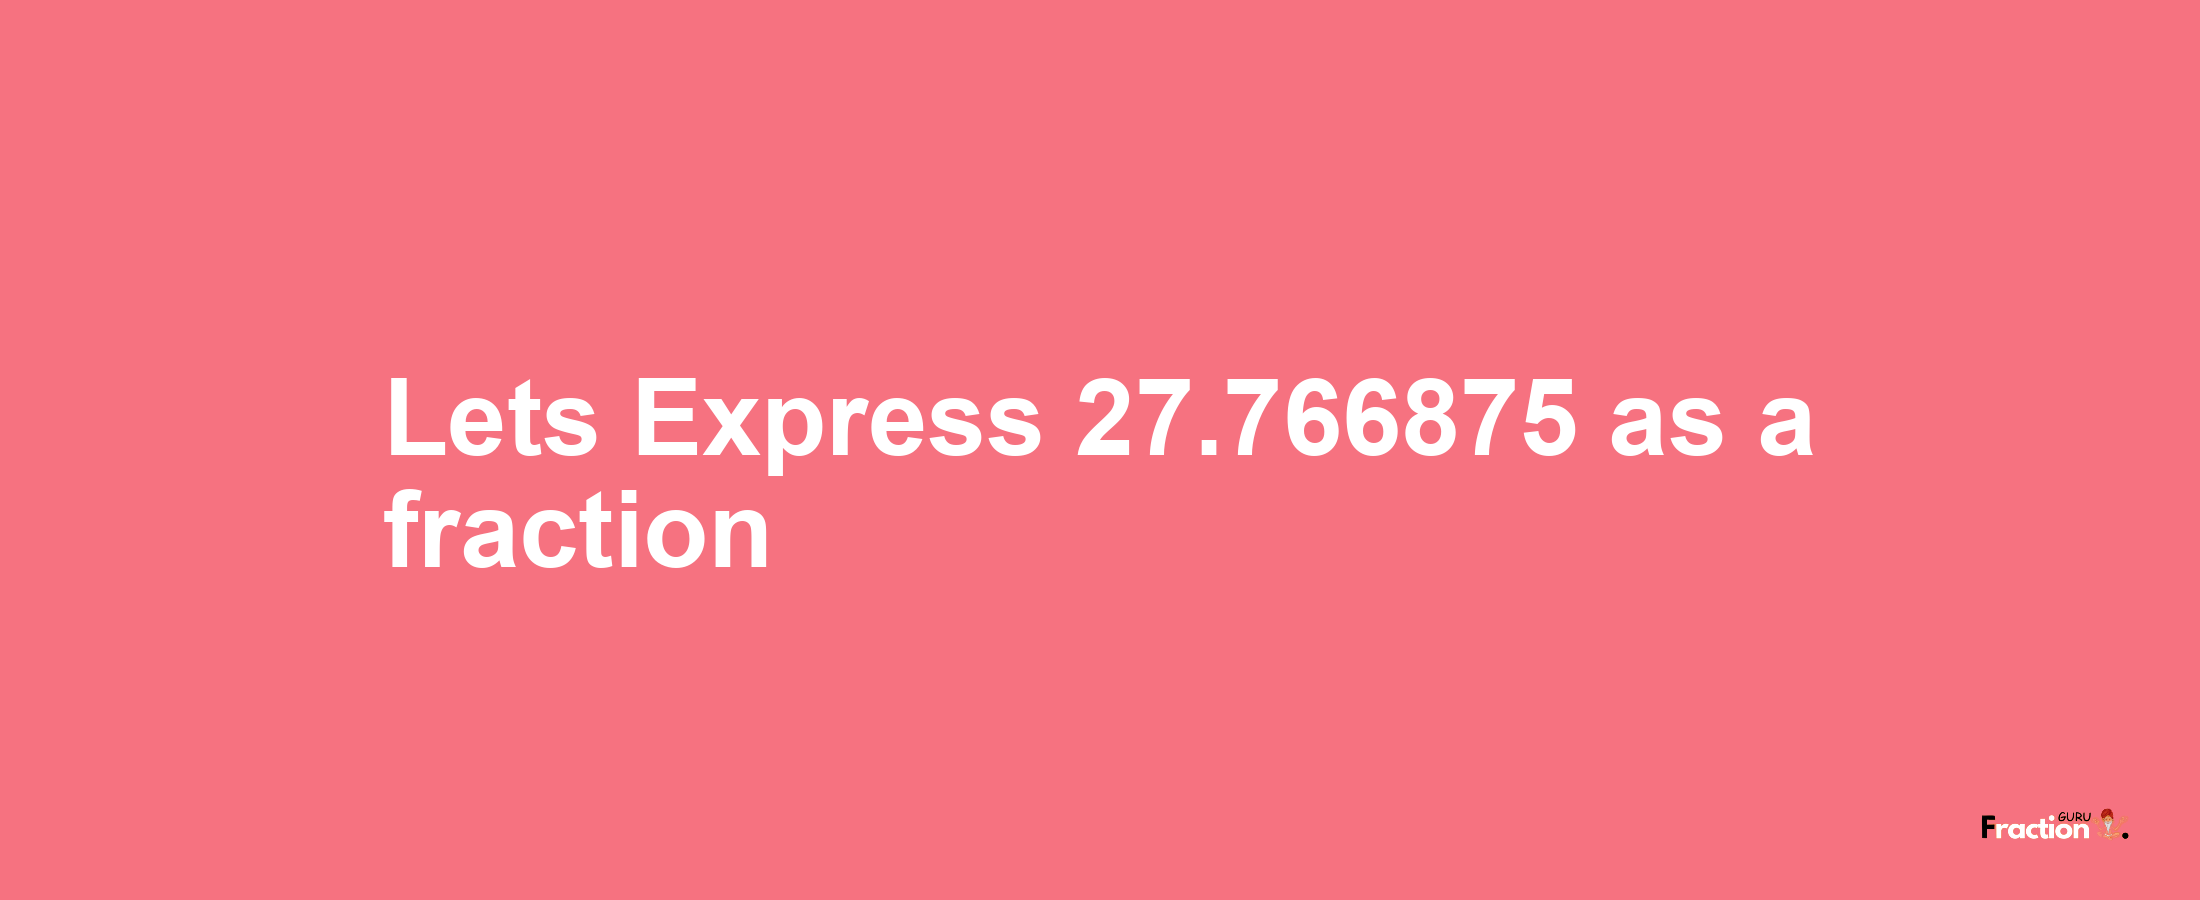 Lets Express 27.766875 as afraction